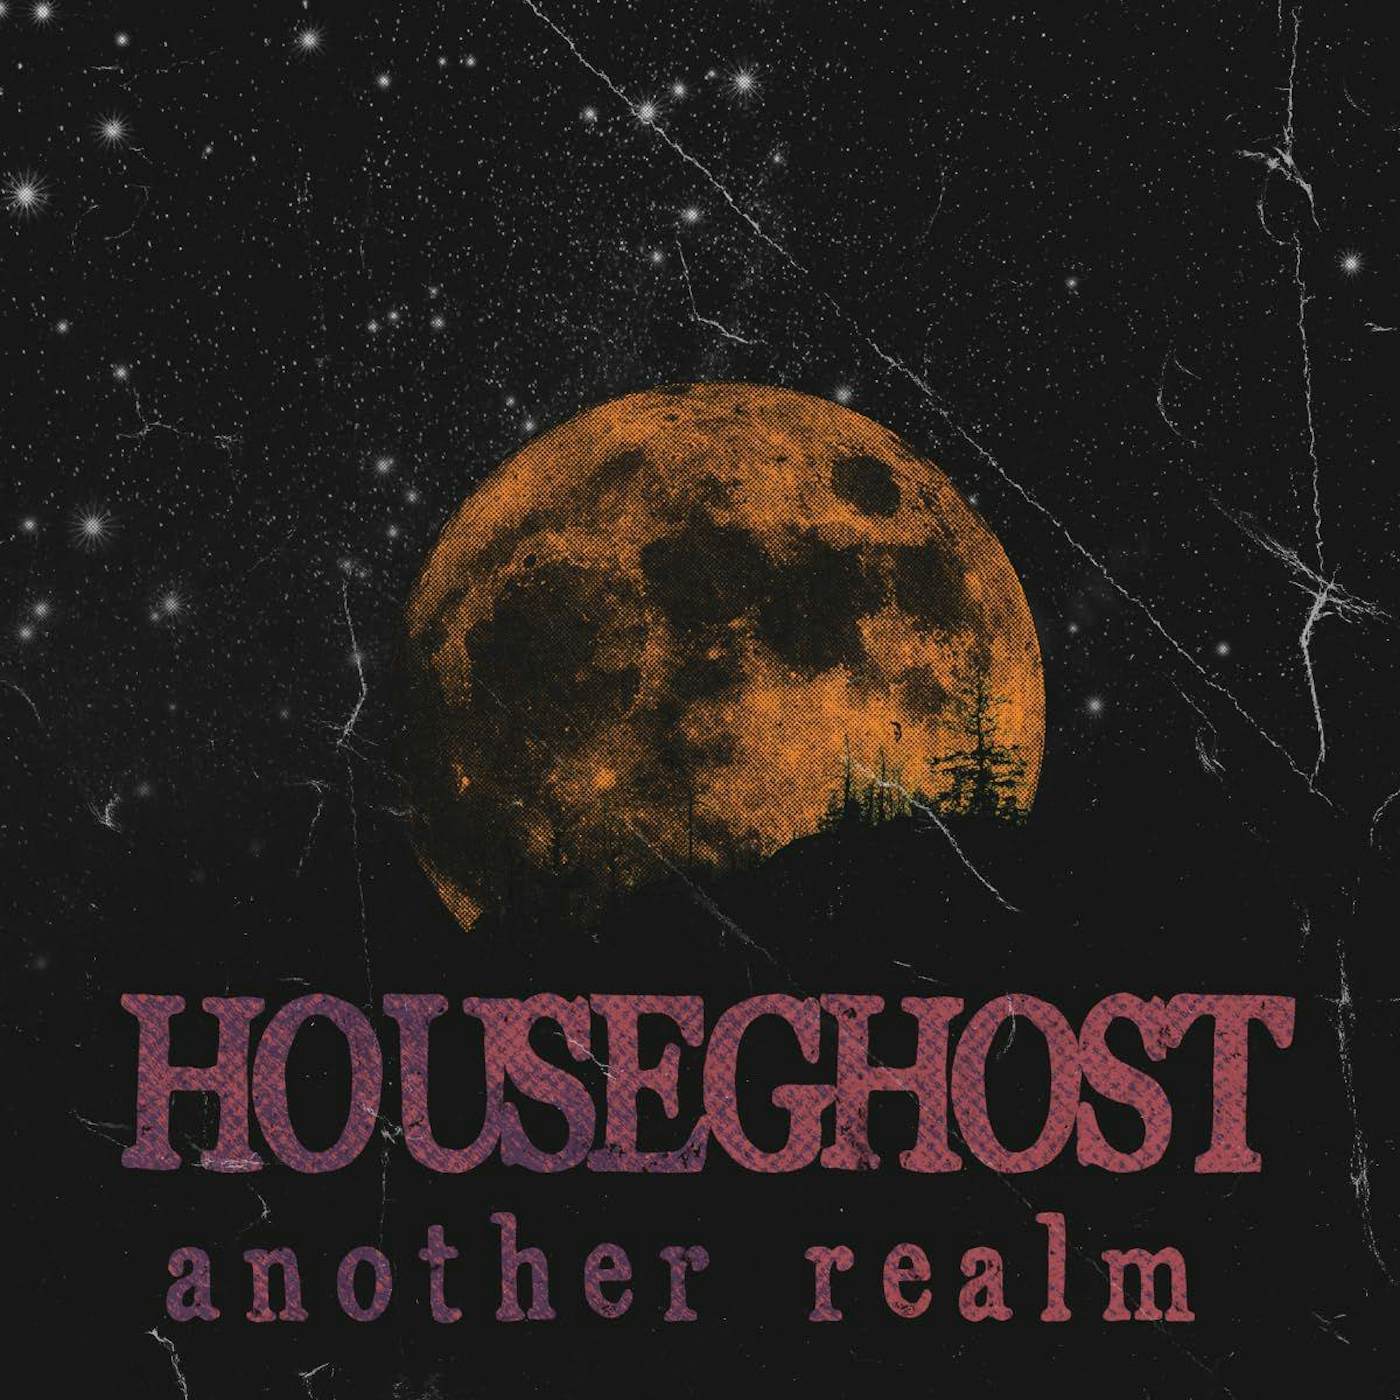 Houseghost Another Realm Vinyl Record